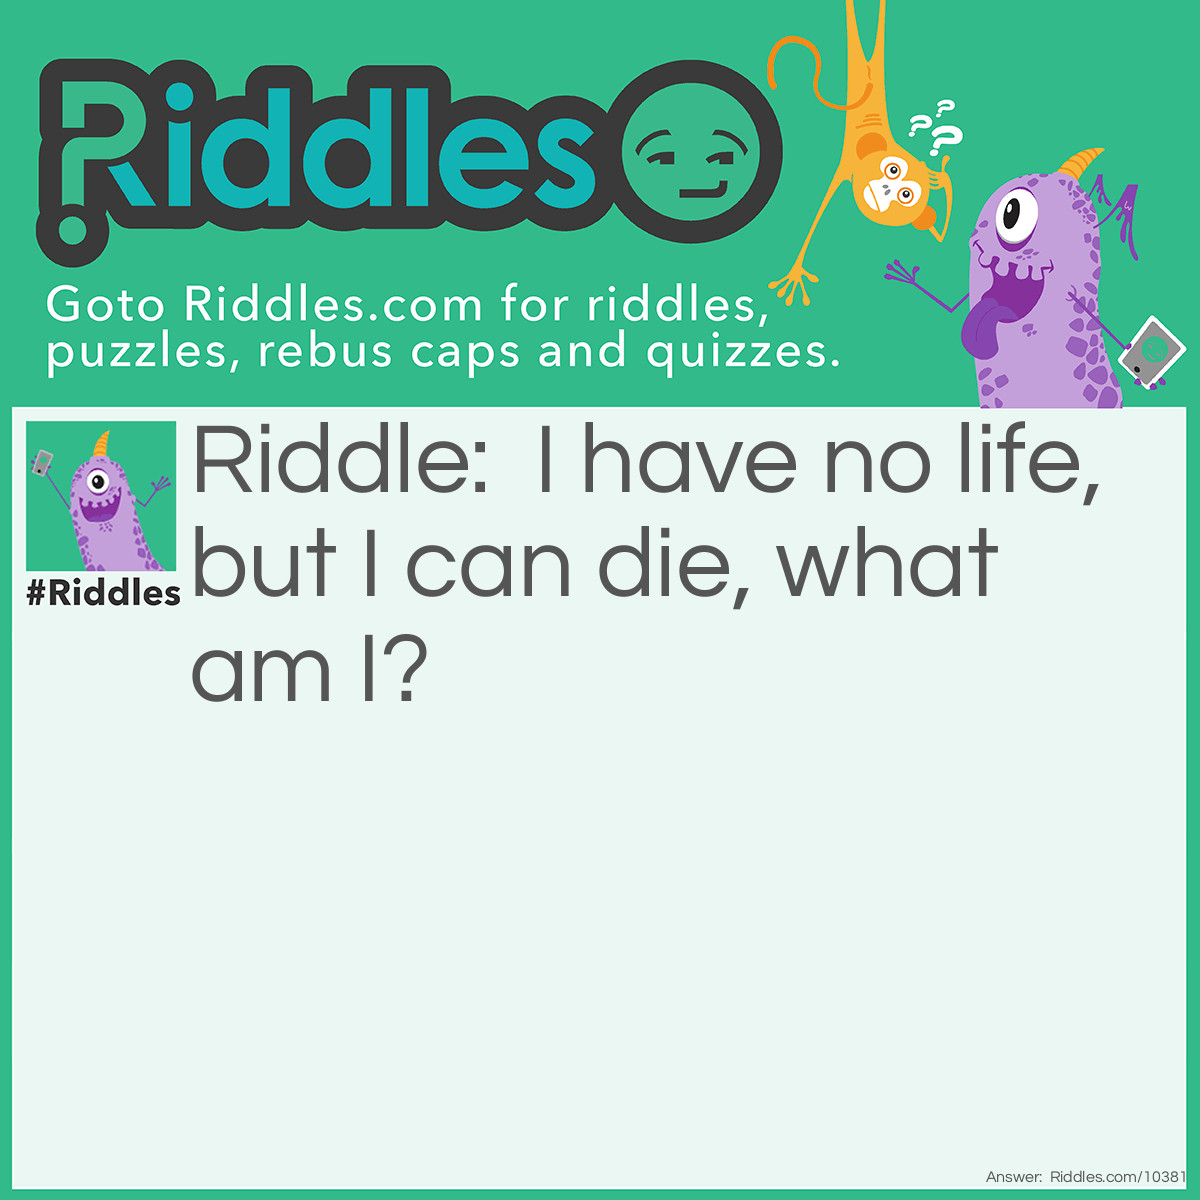 Riddle: I have no life, but I can die, what am I? Answer: Battery.